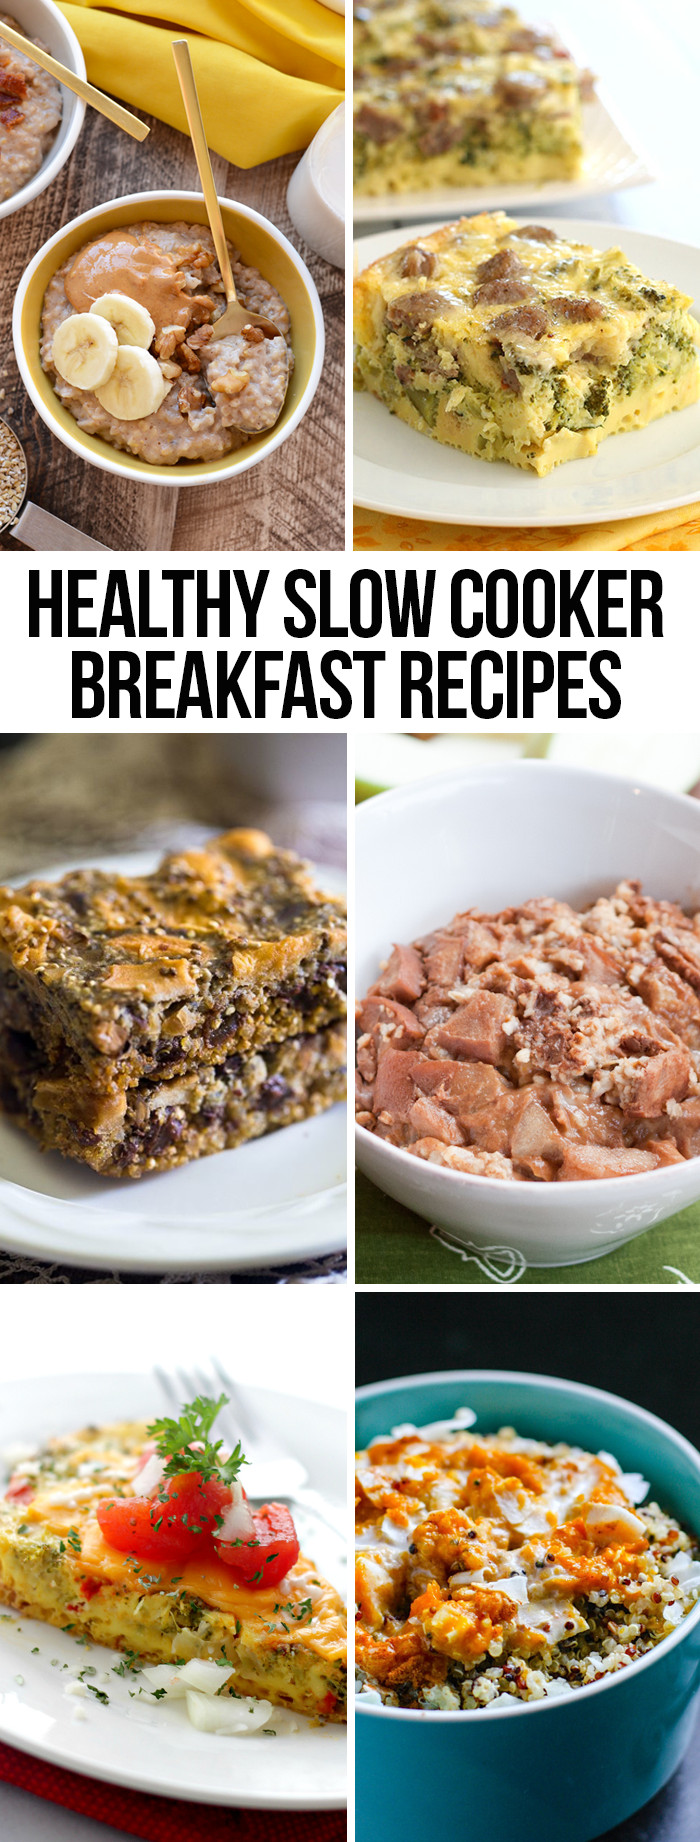 Healthy Slow Cooker Recipes
 Healthy Slow Cooker Breakfast Recipes